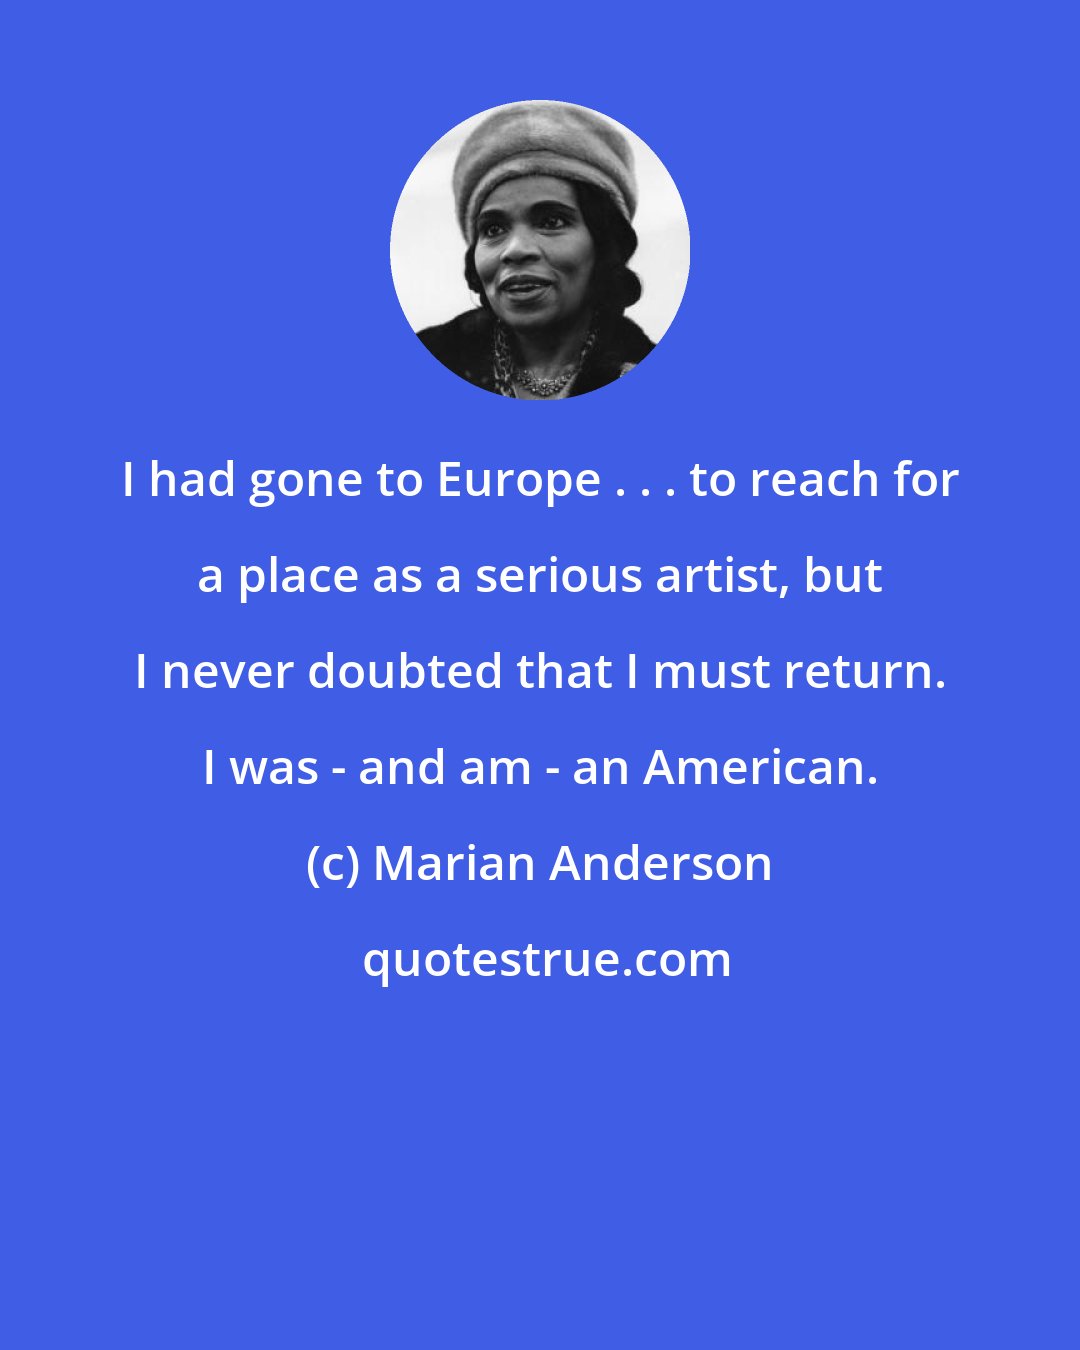 Marian Anderson: I had gone to Europe . . . to reach for a place as a serious artist, but I never doubted that I must return. I was - and am - an American.